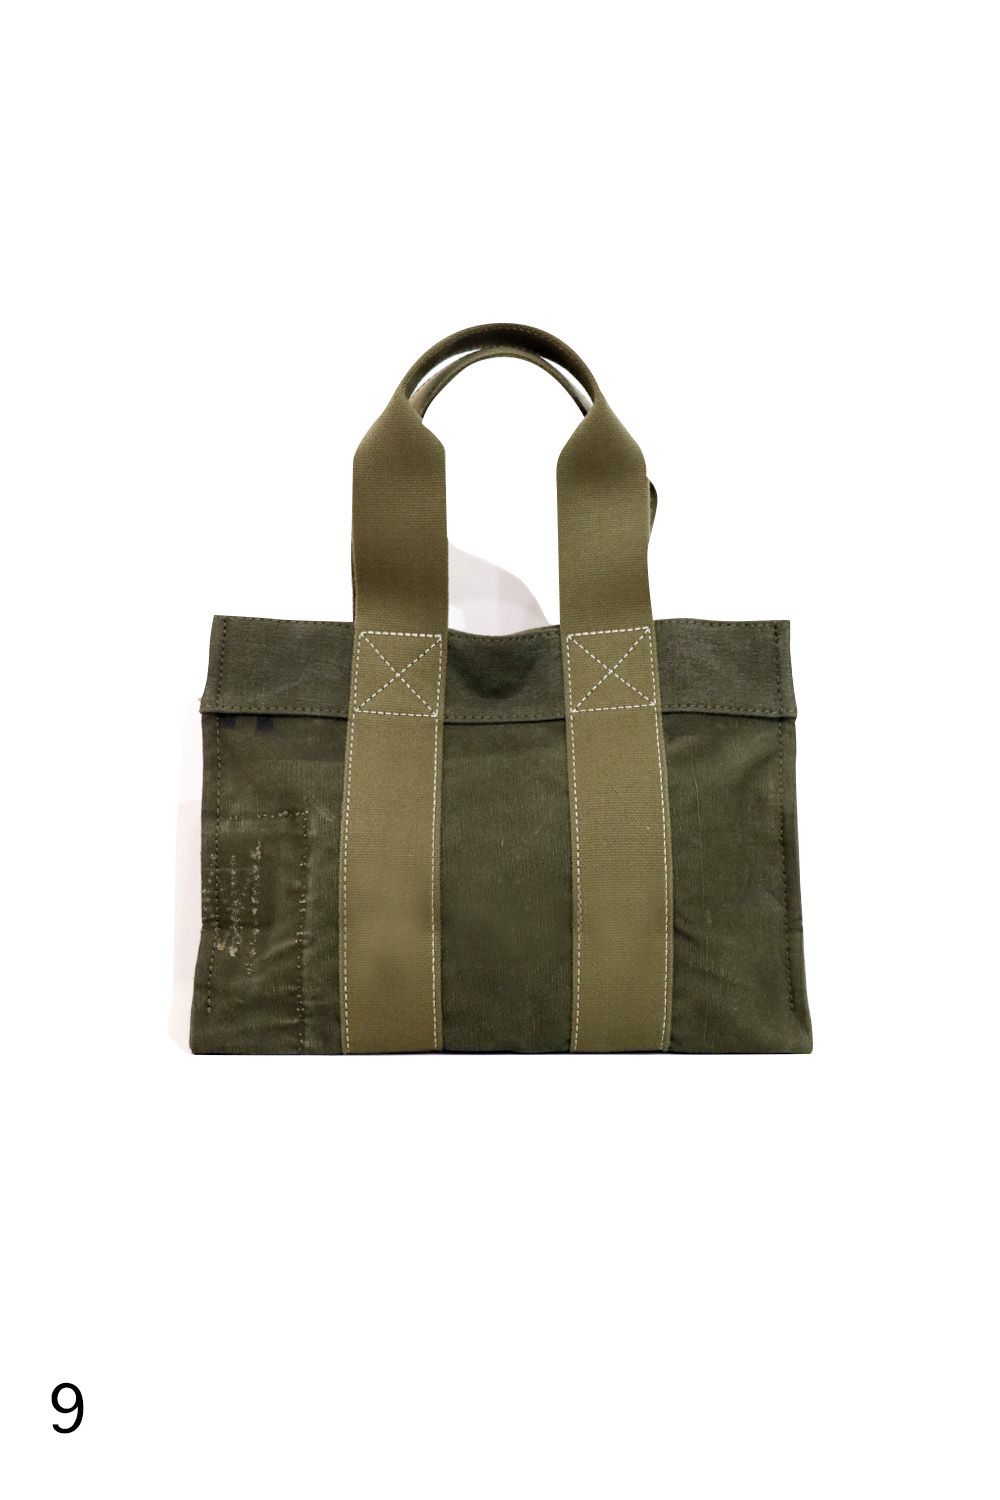 READY MADE レディメイド EASY TOTE LARGE ヴィンテージコットン イージートートバッグ RE-CO-KH-00-00-227 カーキ